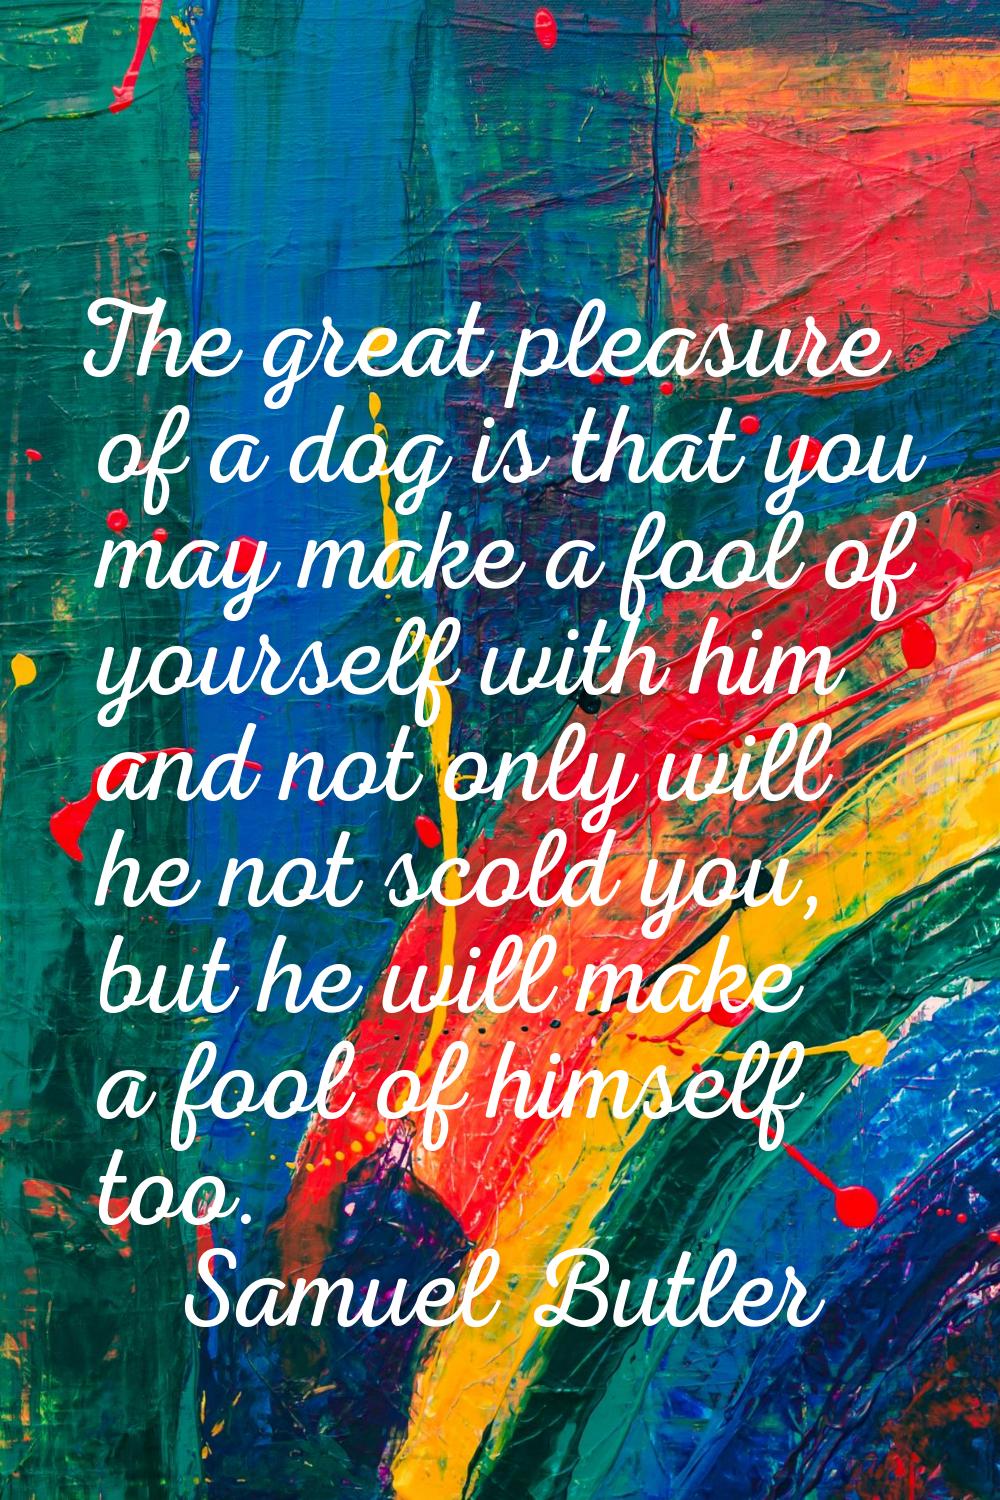 The great pleasure of a dog is that you may make a fool of yourself with him and not only will he n